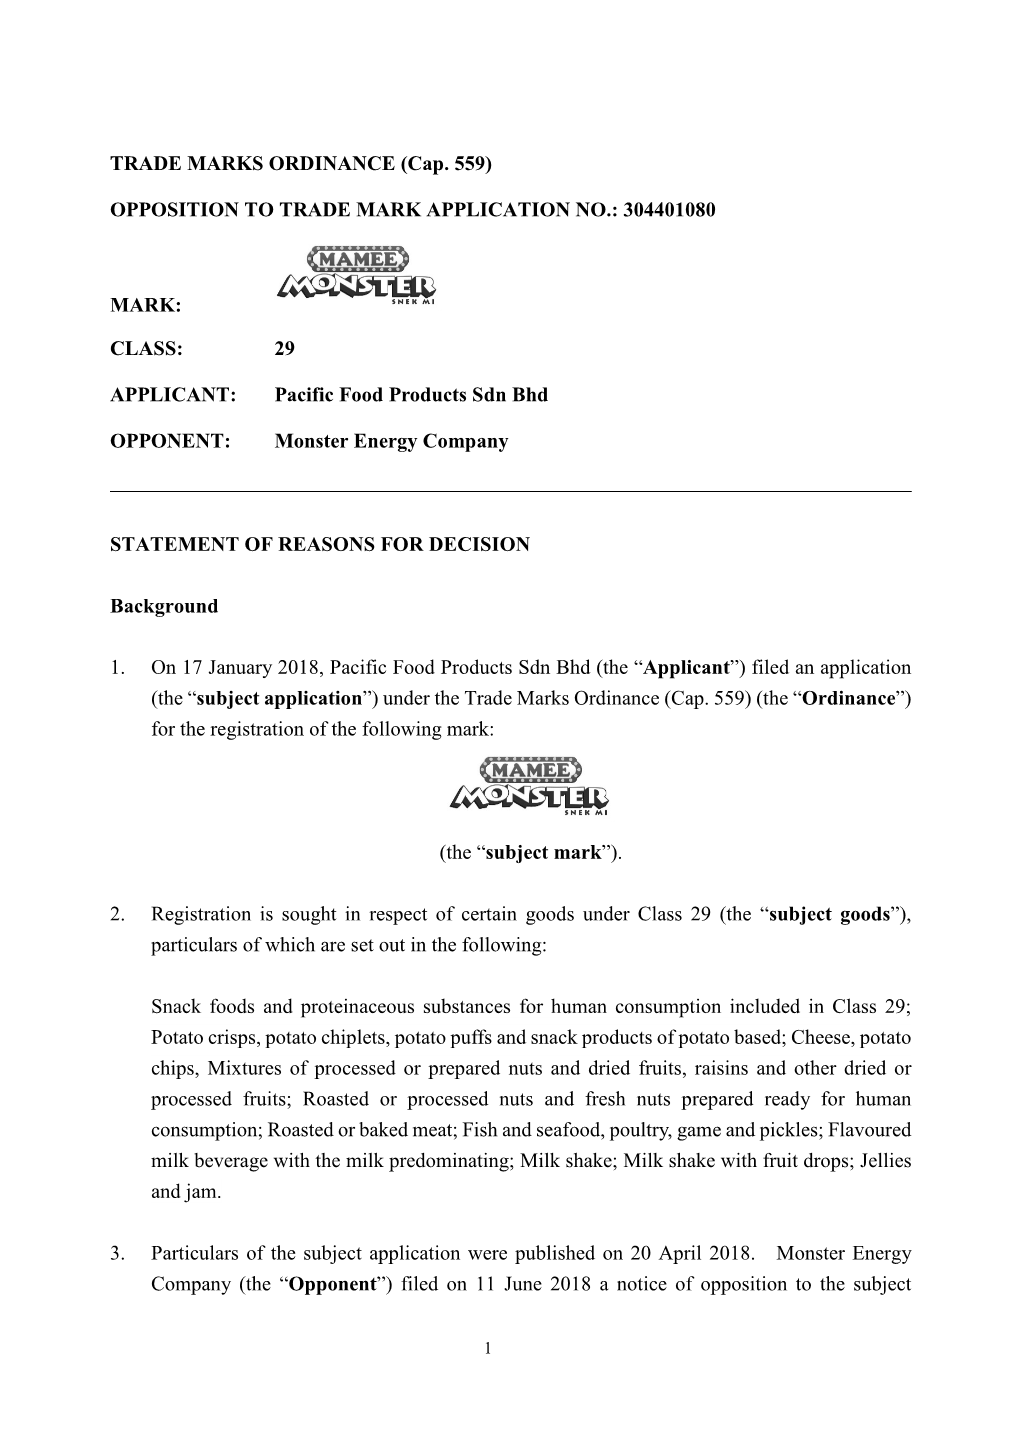 (Cap. 559) OPPOSITION to TRADE MARK APPLICATION